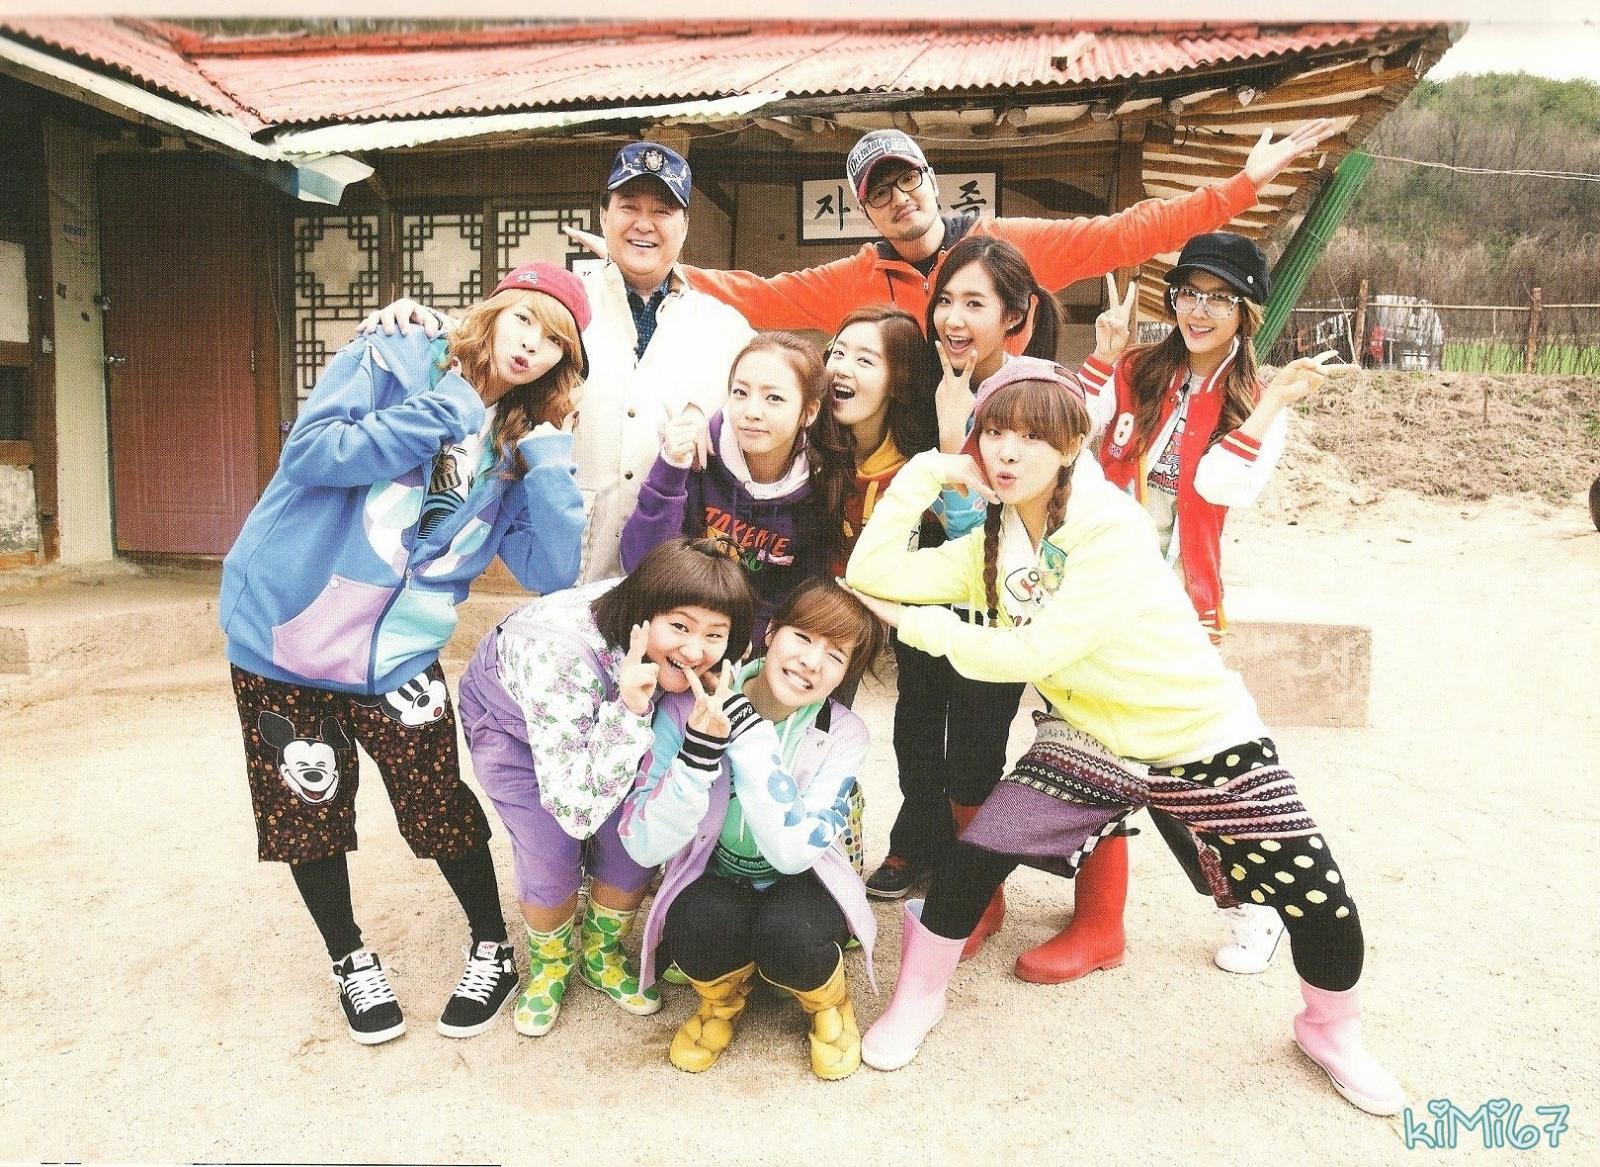 Invincible youth